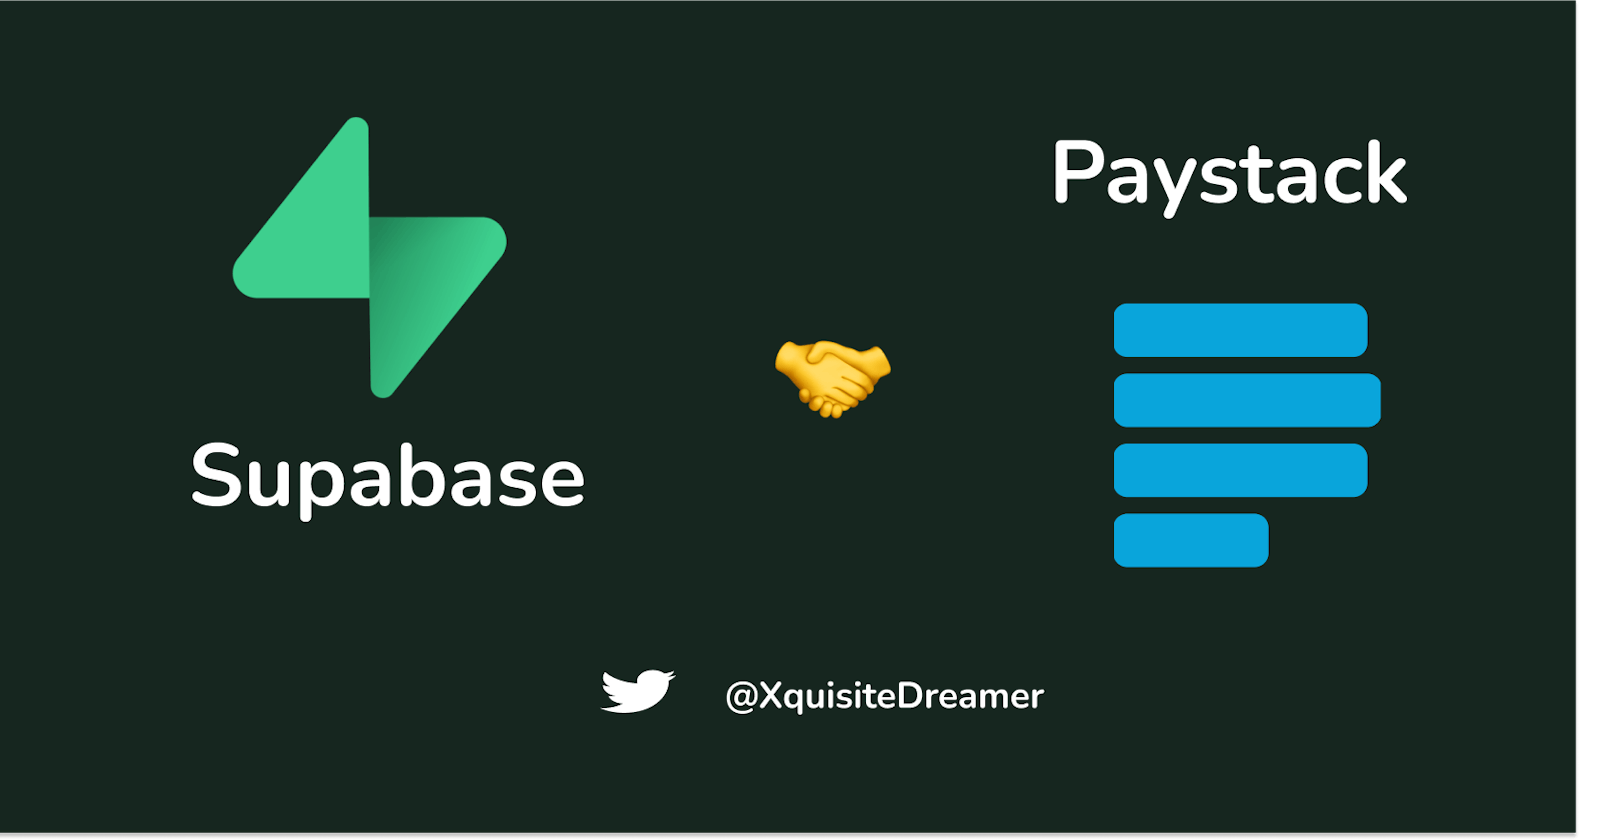 Accept Payments For Your African-Based Business Using Supabase Edge Functions and Paystack